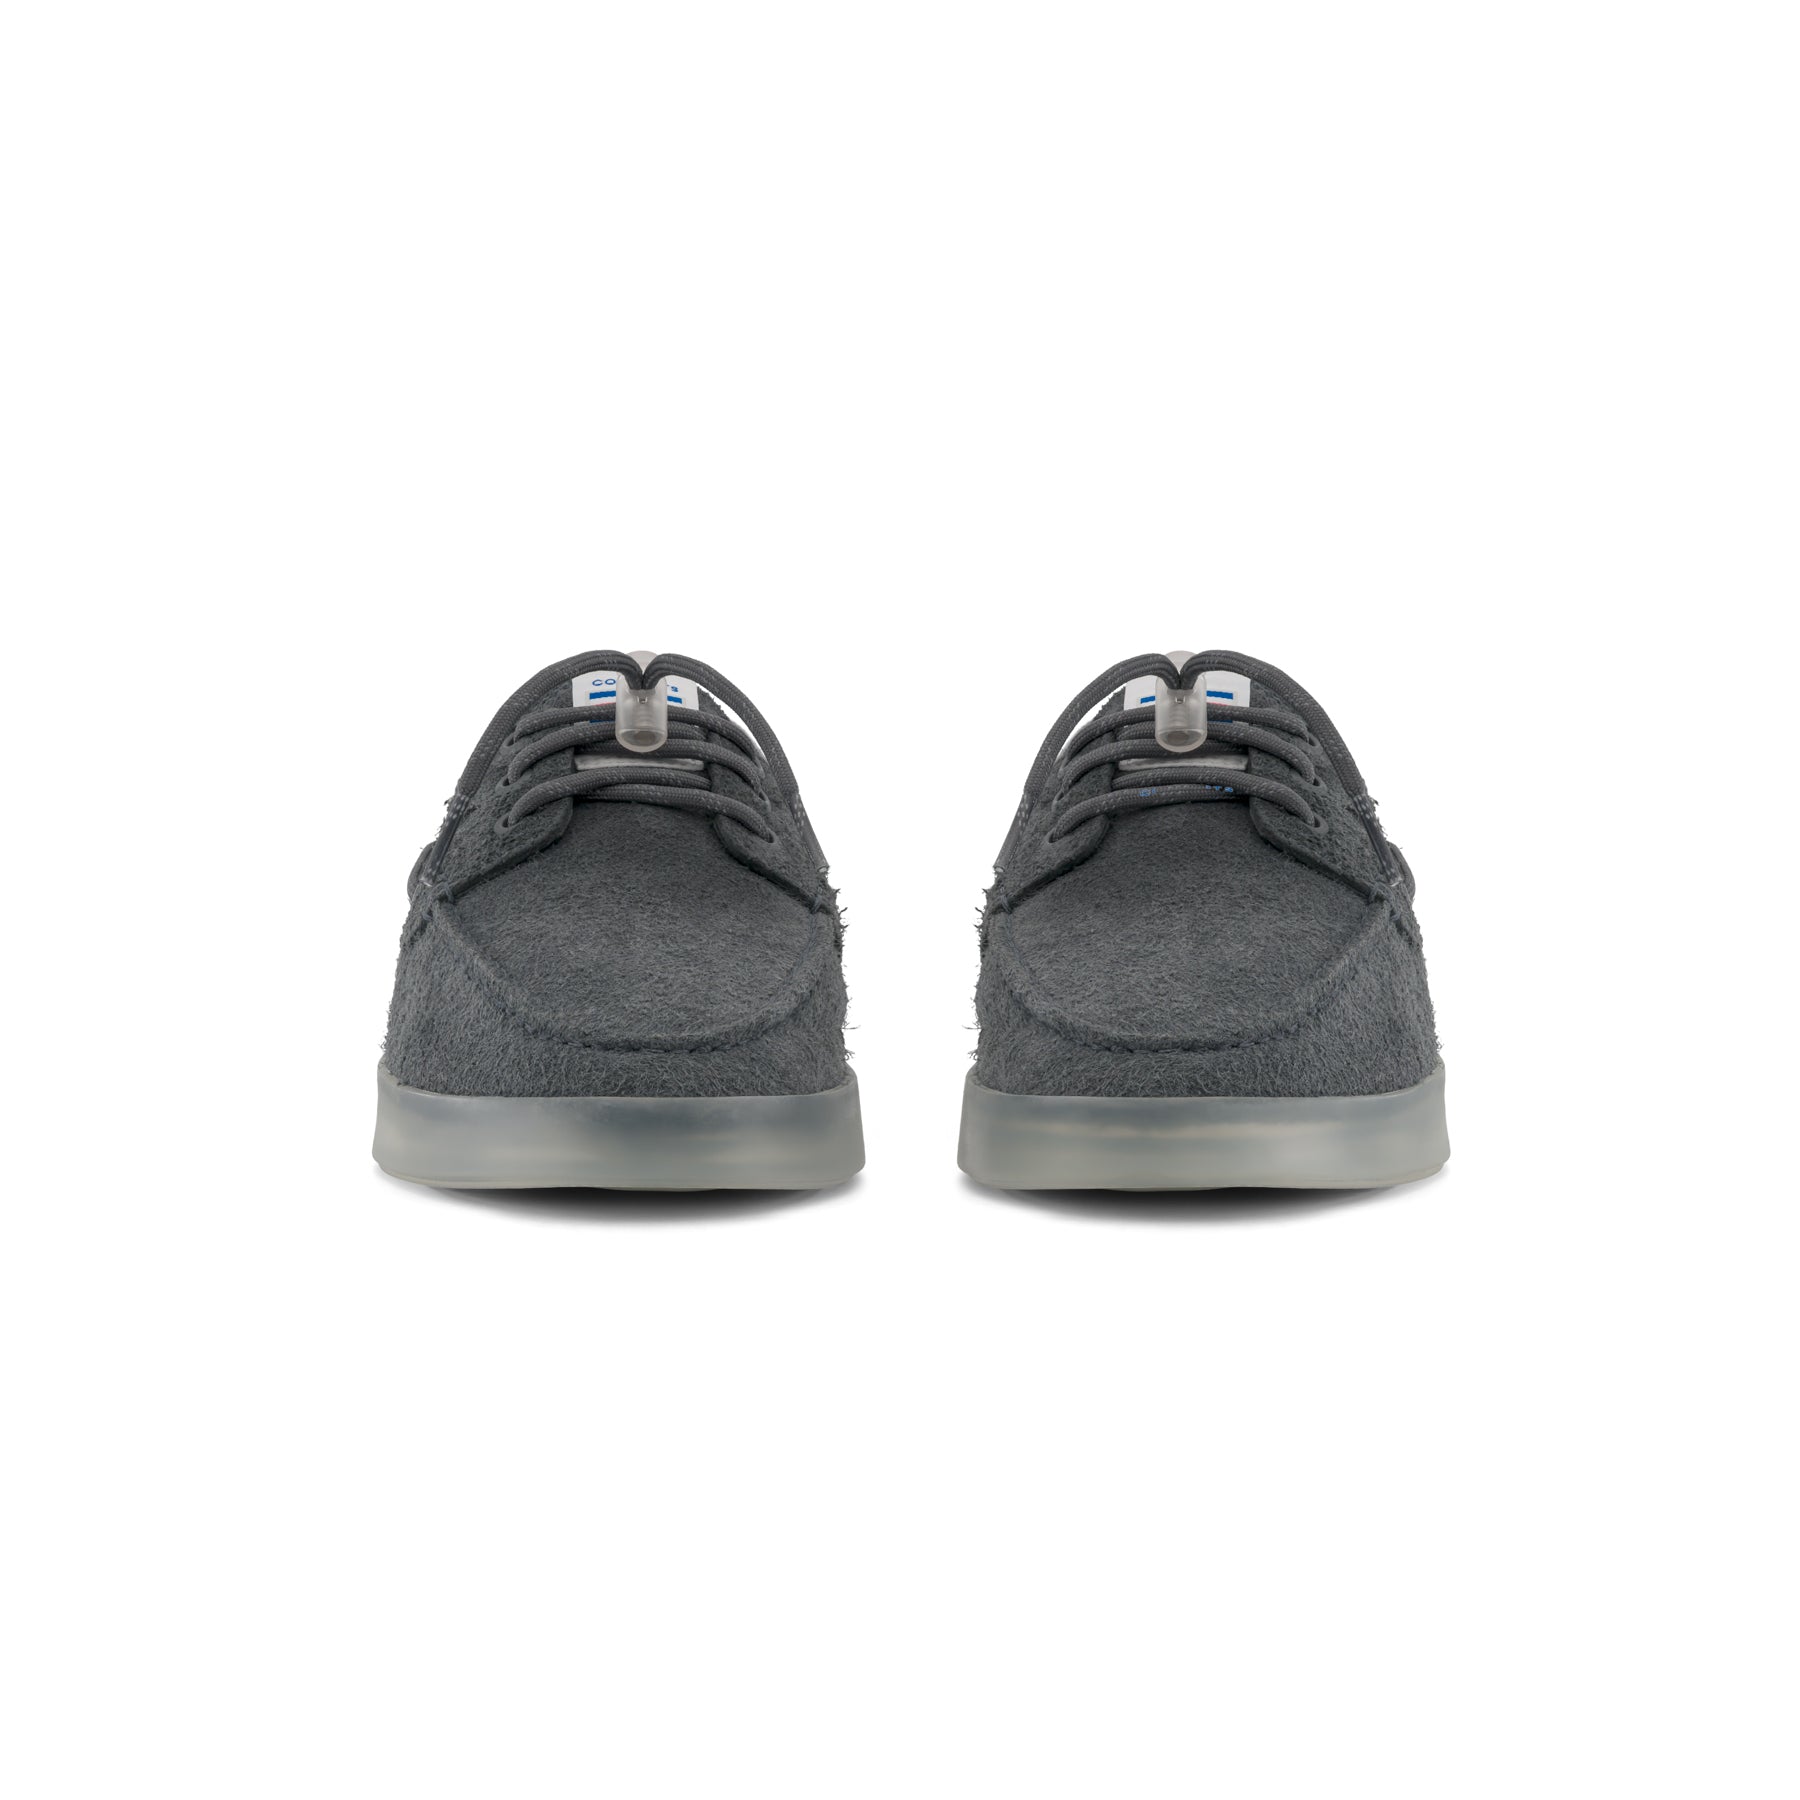 Concepts x Sperry Authentic Original 3-Eye Cup (Grey)